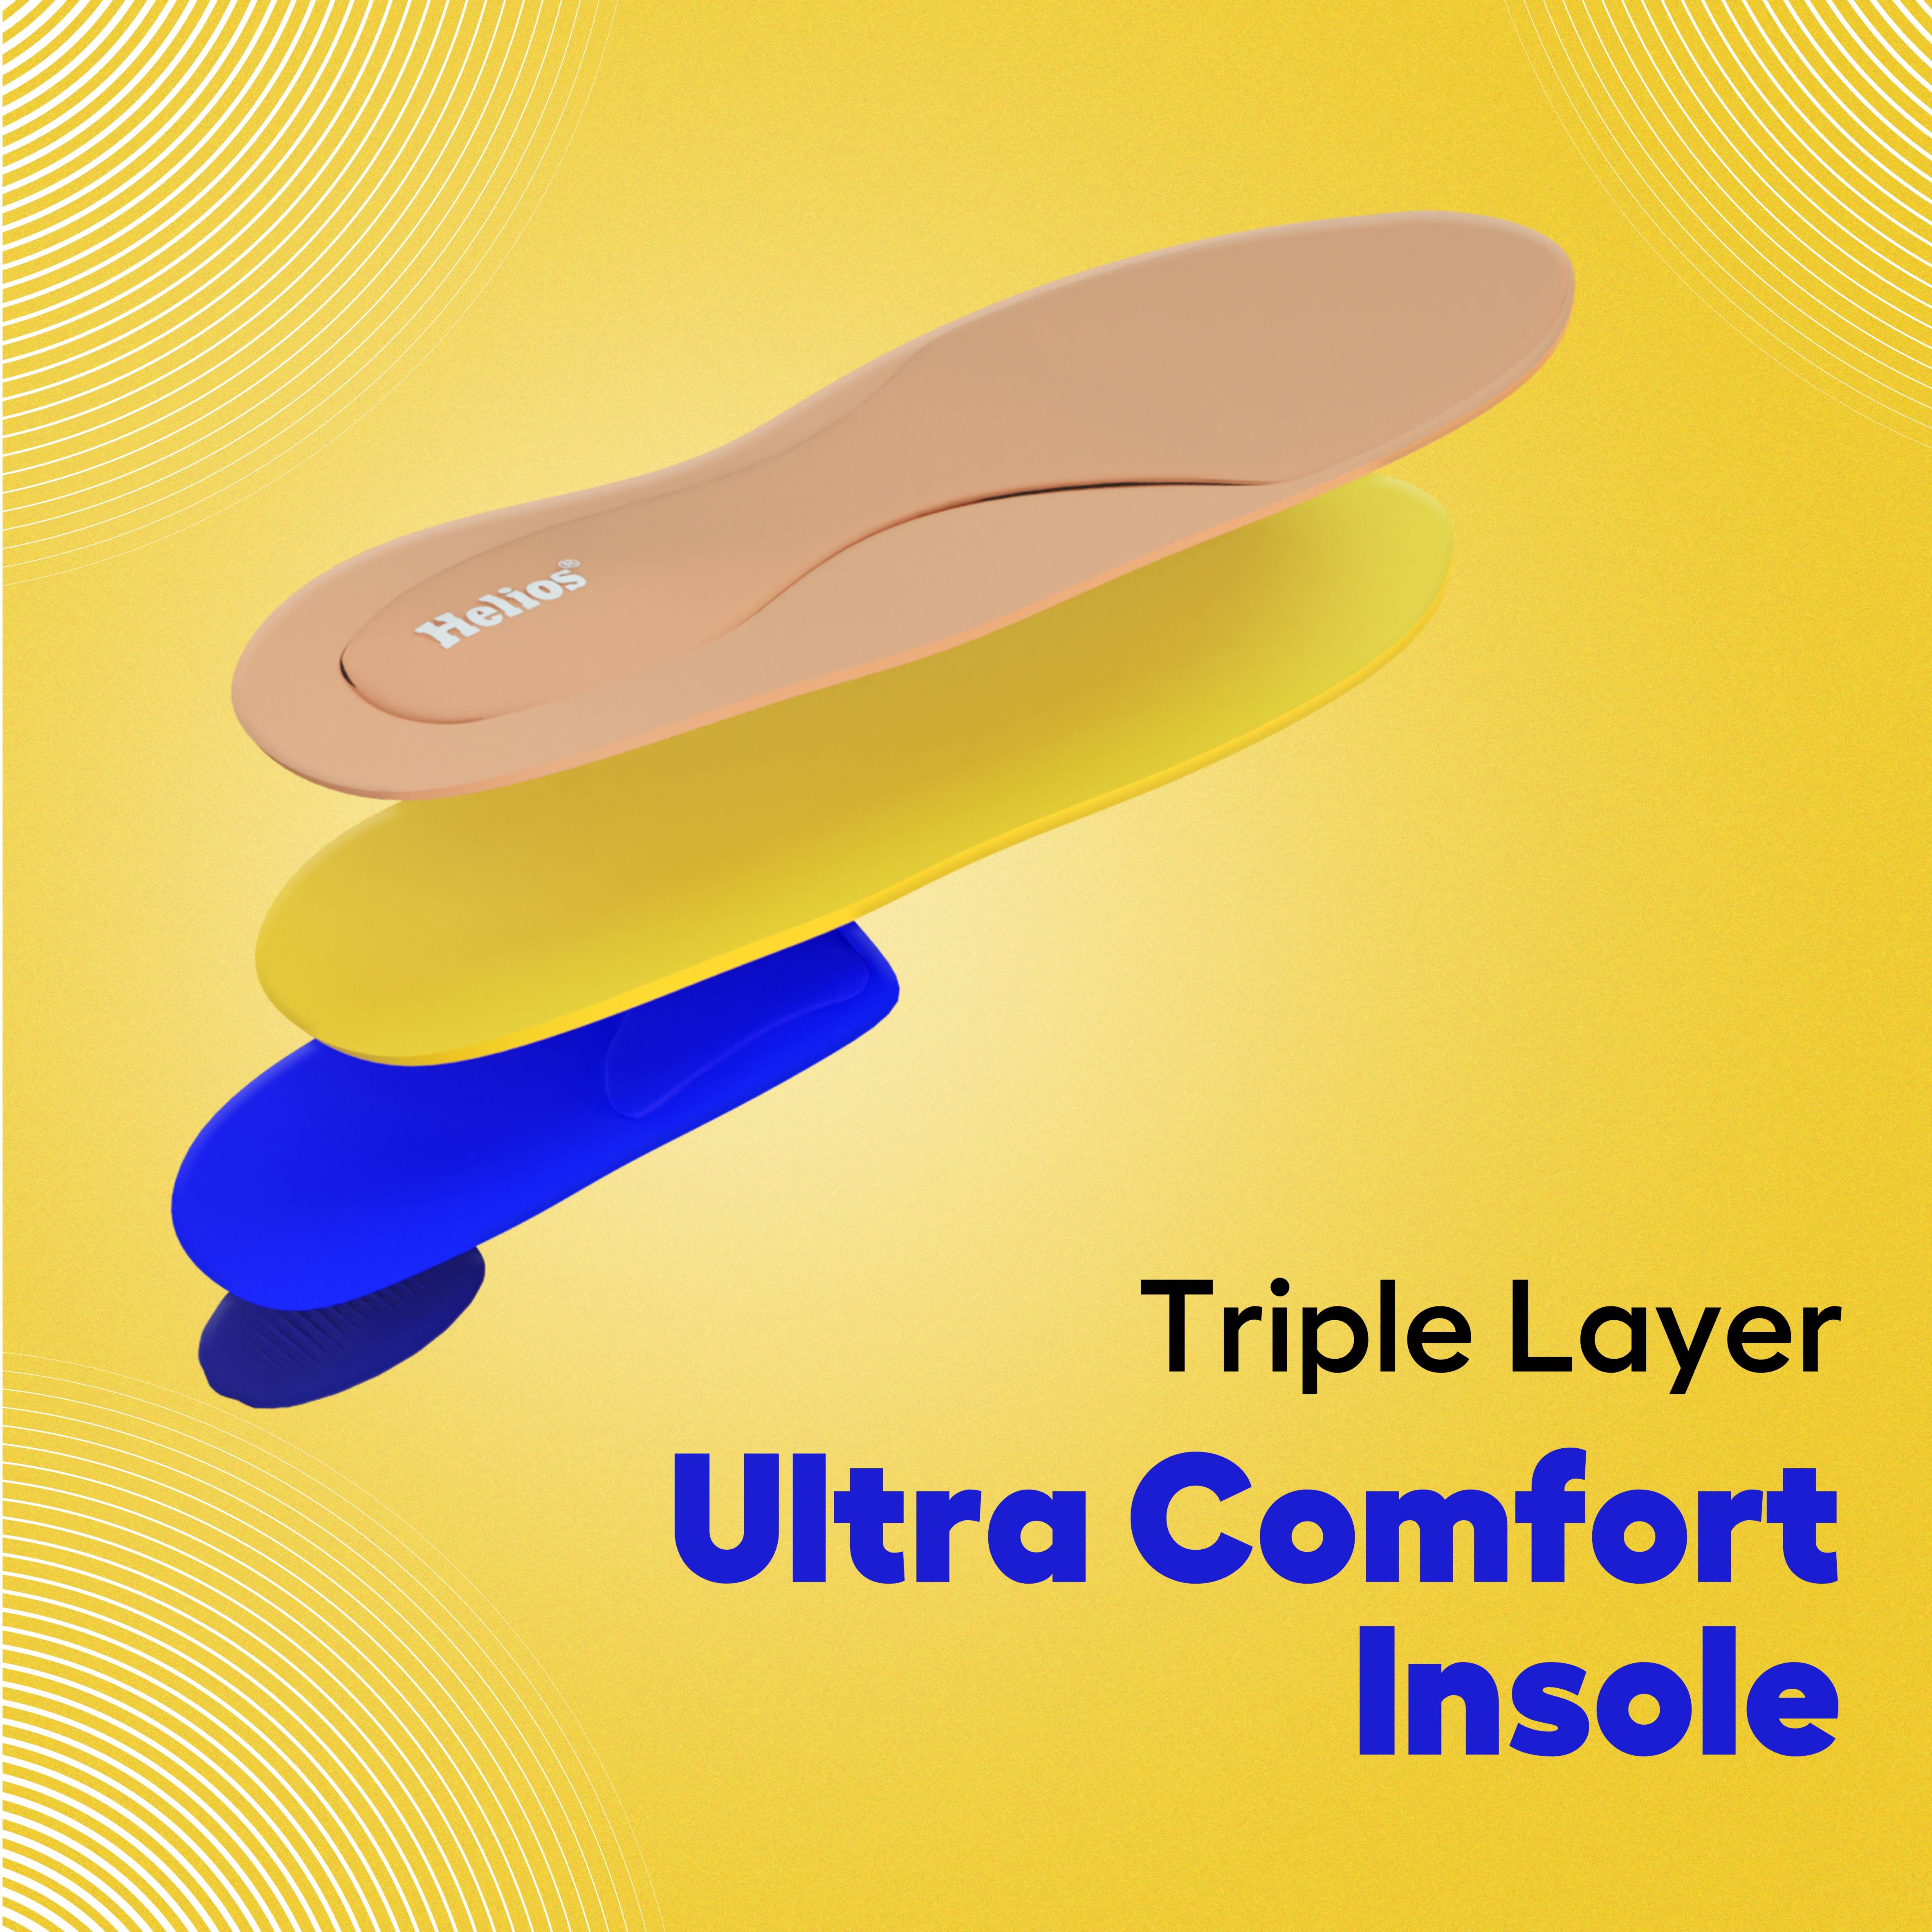 HELIOS TRIPLE LAYER ULTRA COMFORT INSOLES FOR PAIN RELIEF AND SHOCK ABSORPTION